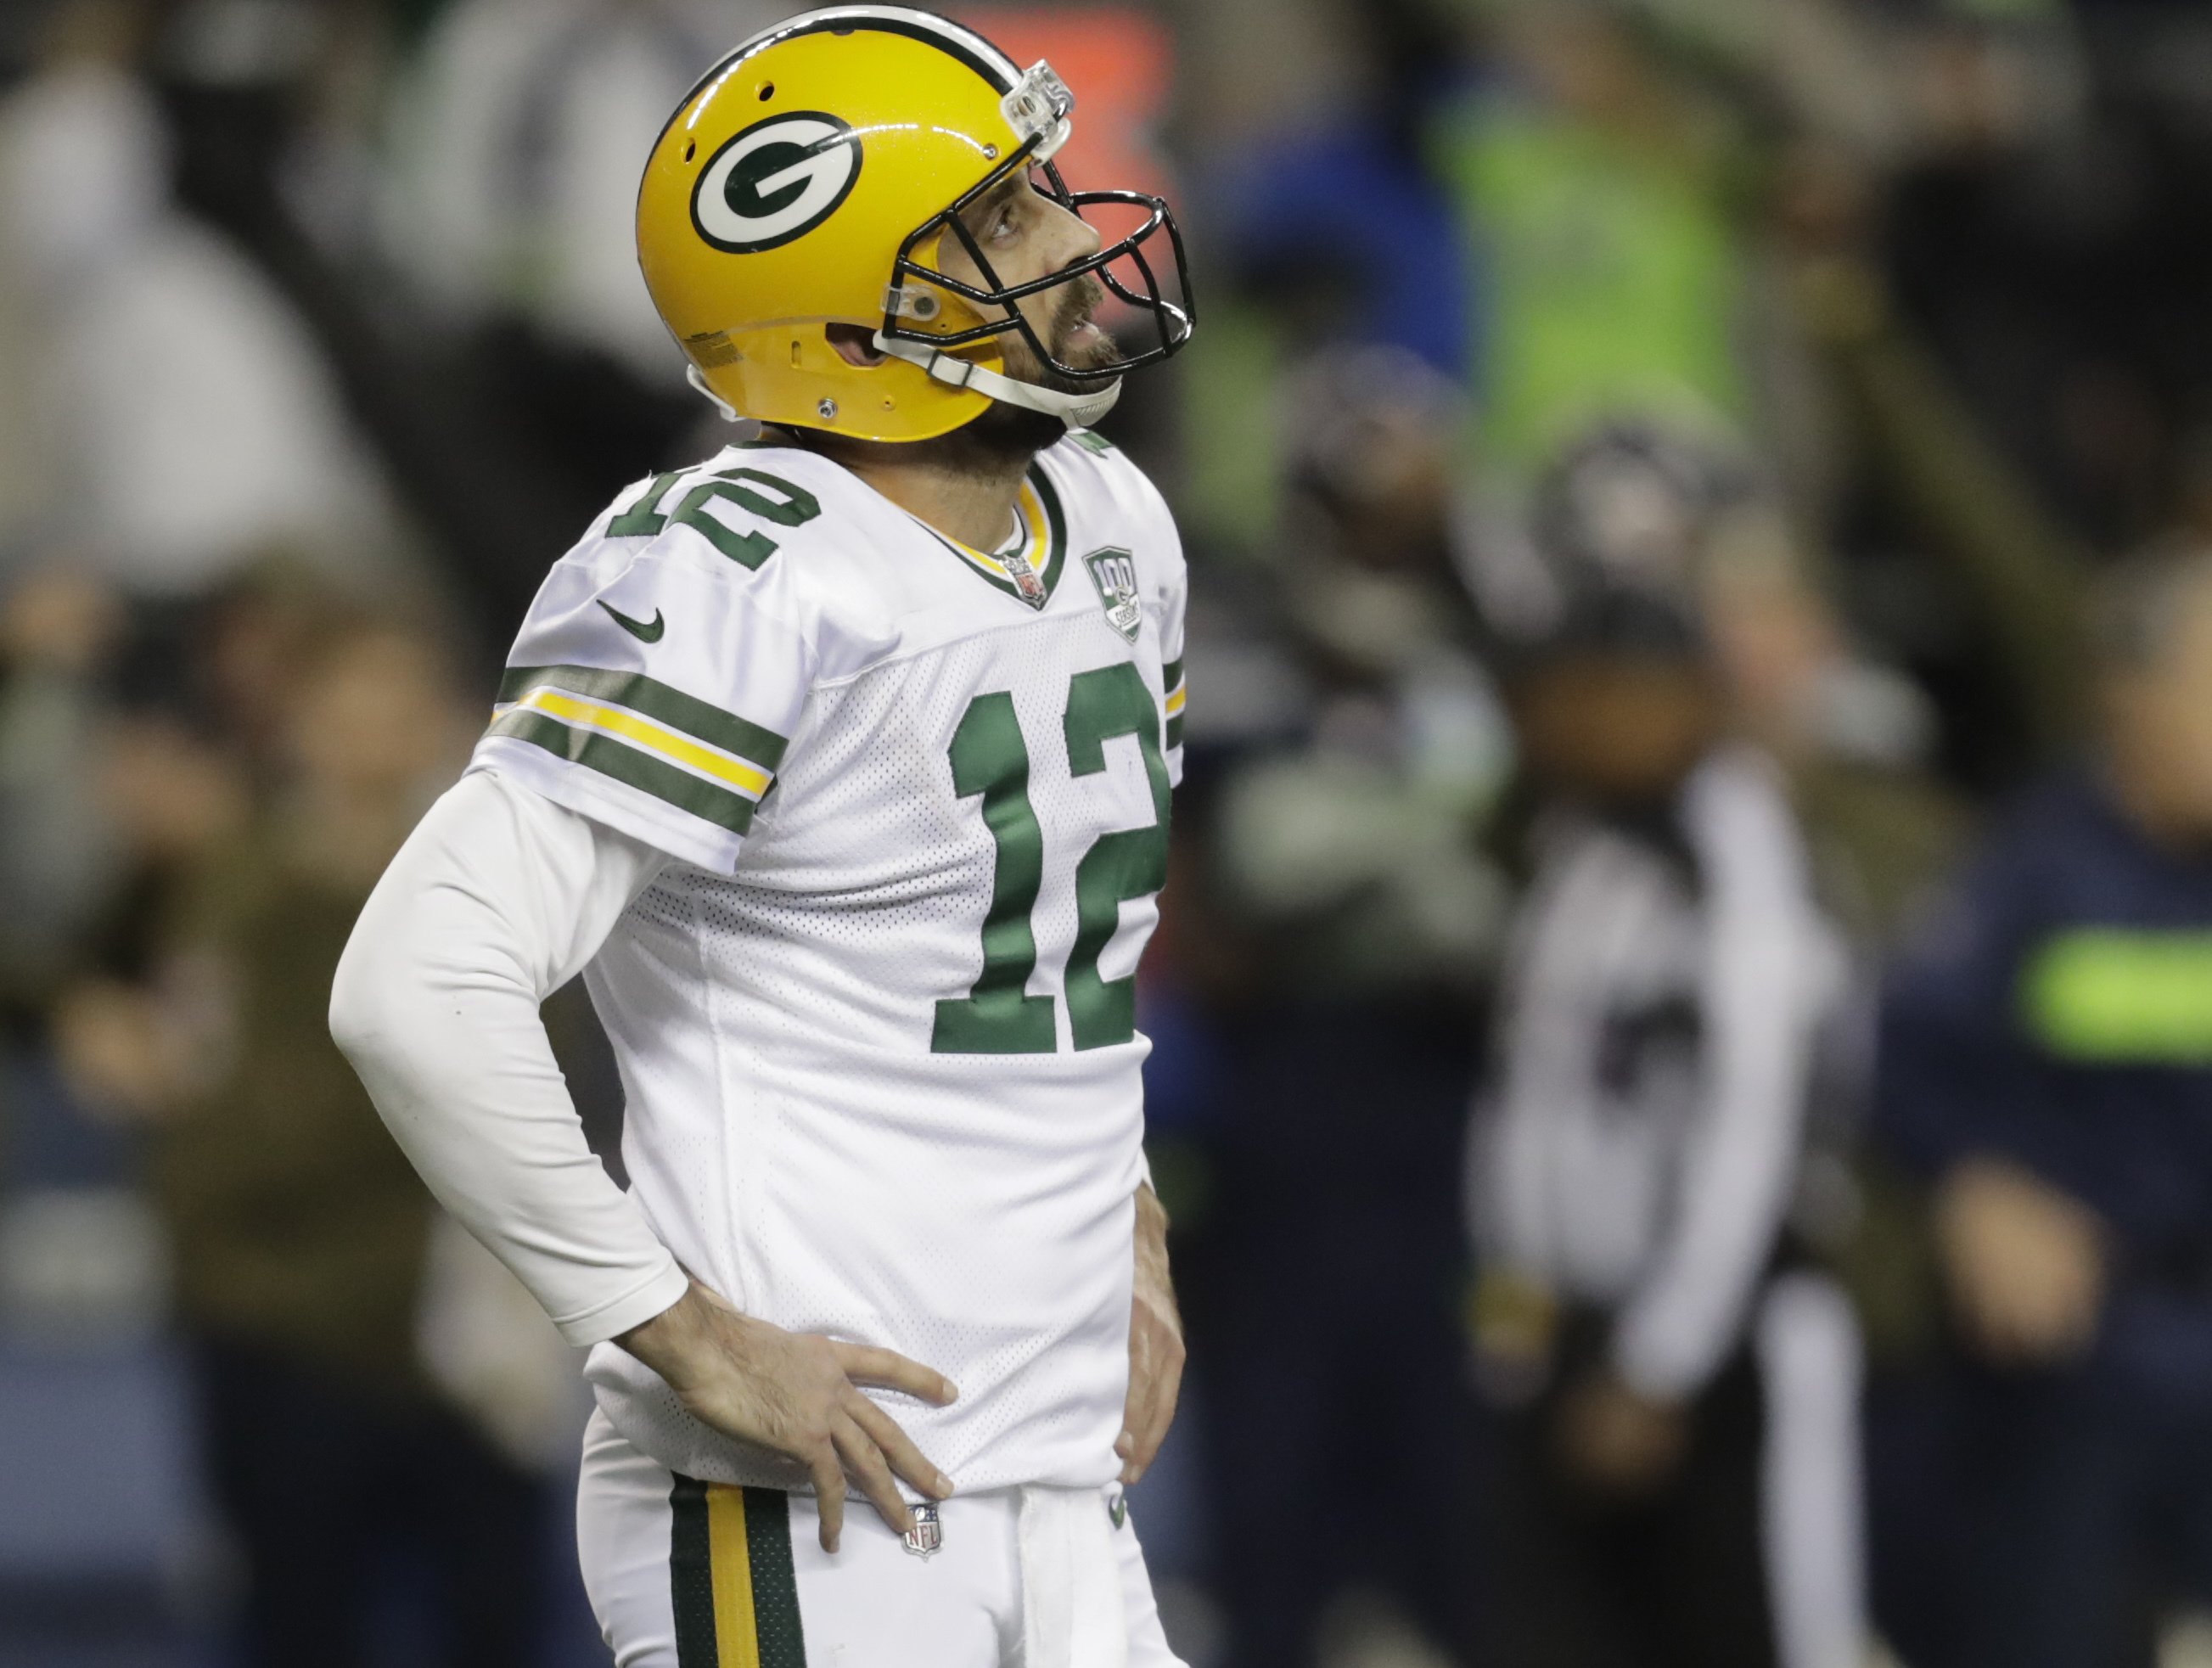 After huge 1st half, Packers go silent in loss to Seahawks – WKTY